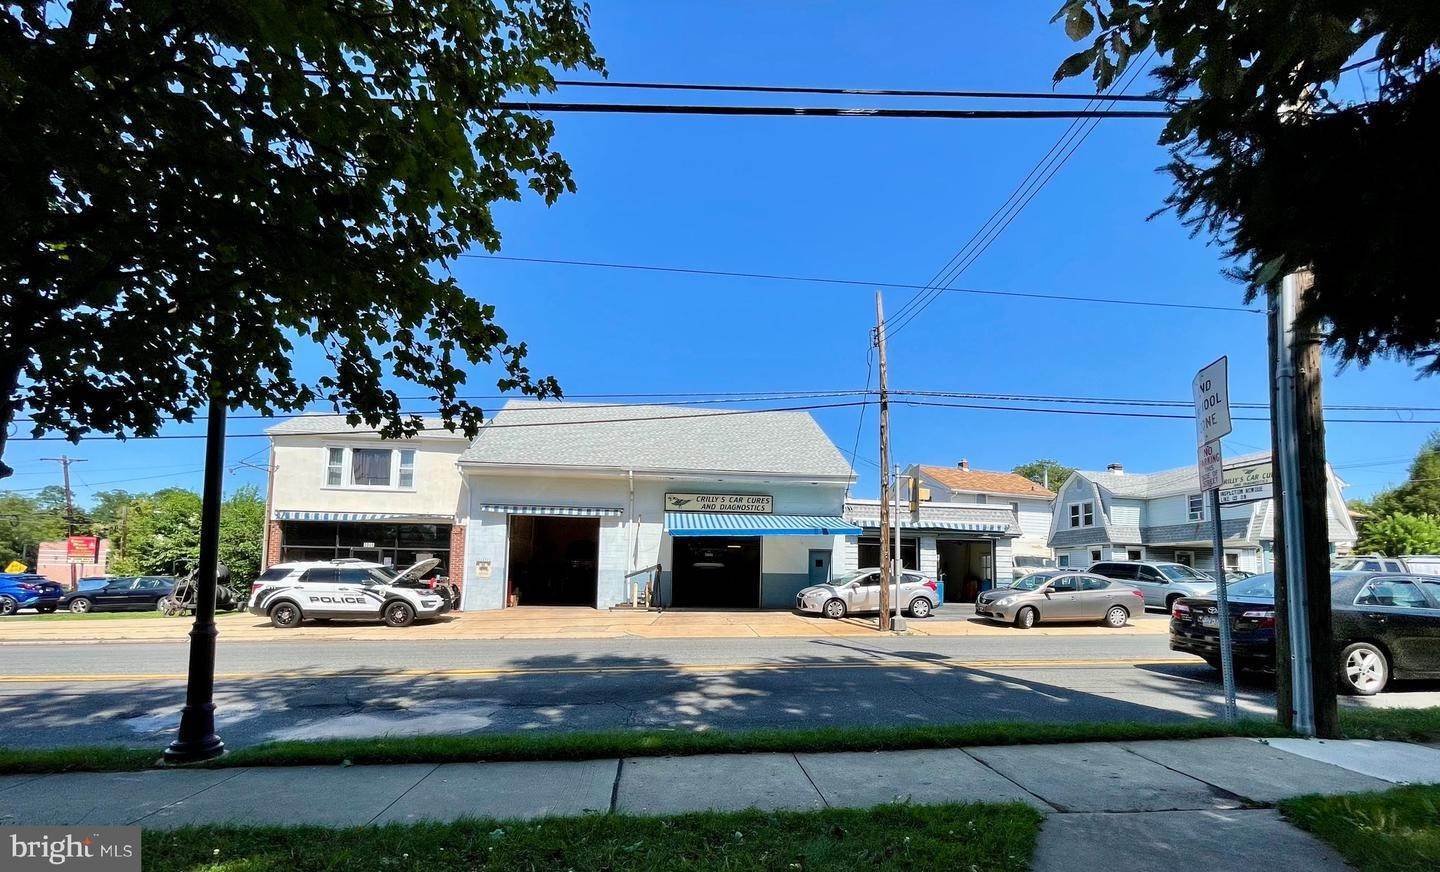 Commercial for Sale at 3005 & 3001 EDGMONT Avenue Brookhaven, Pennsylvania 19015 United States